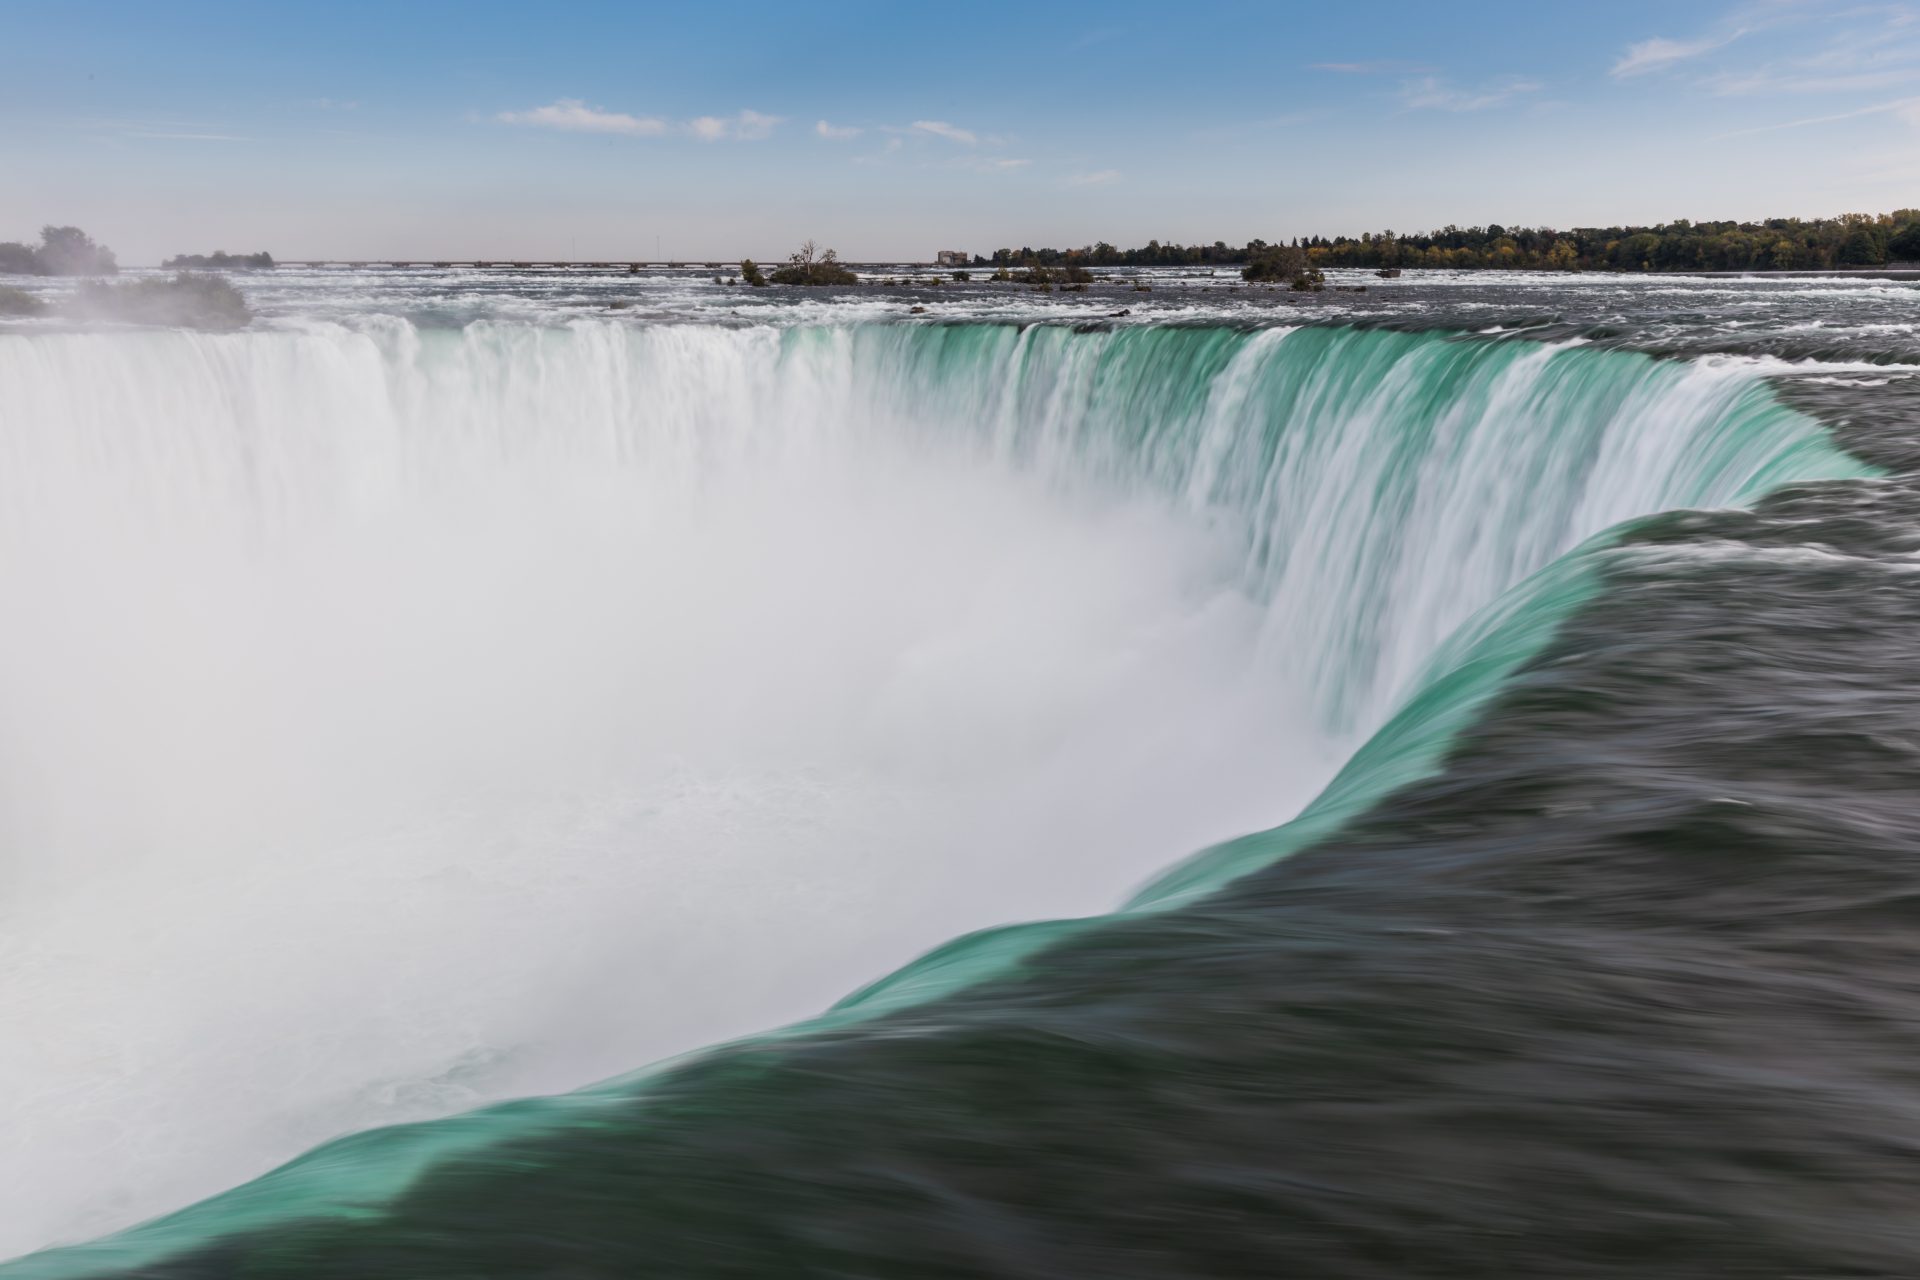 Niagara Falls actually is composed of three separate falls